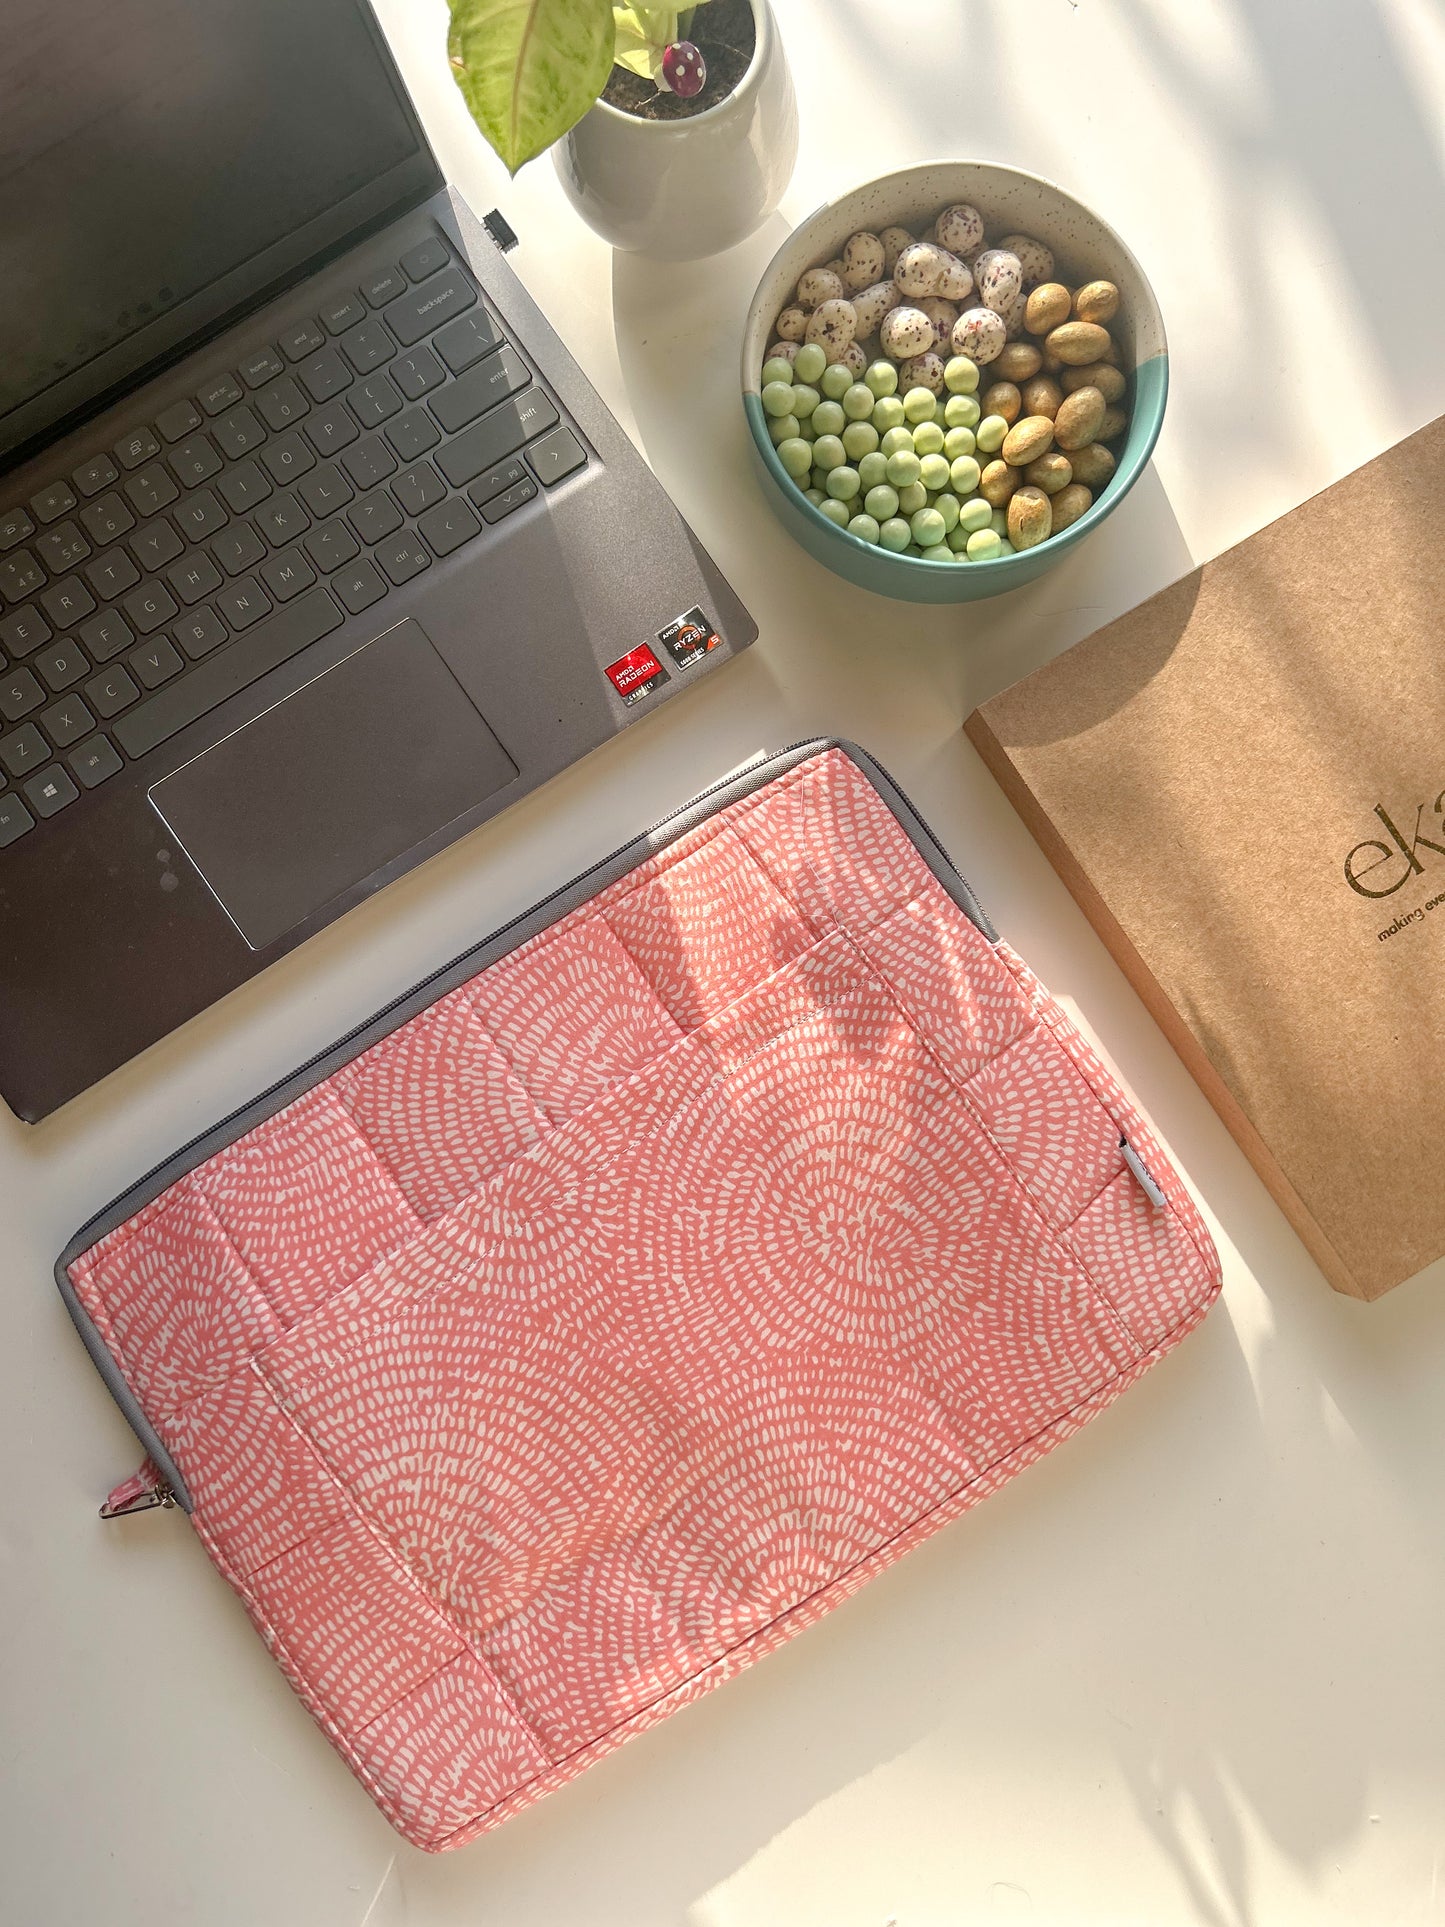 Sustainable Handmade Cotton Laptop Sleeve/Laptop Cover by Ekatra - Pink spiral